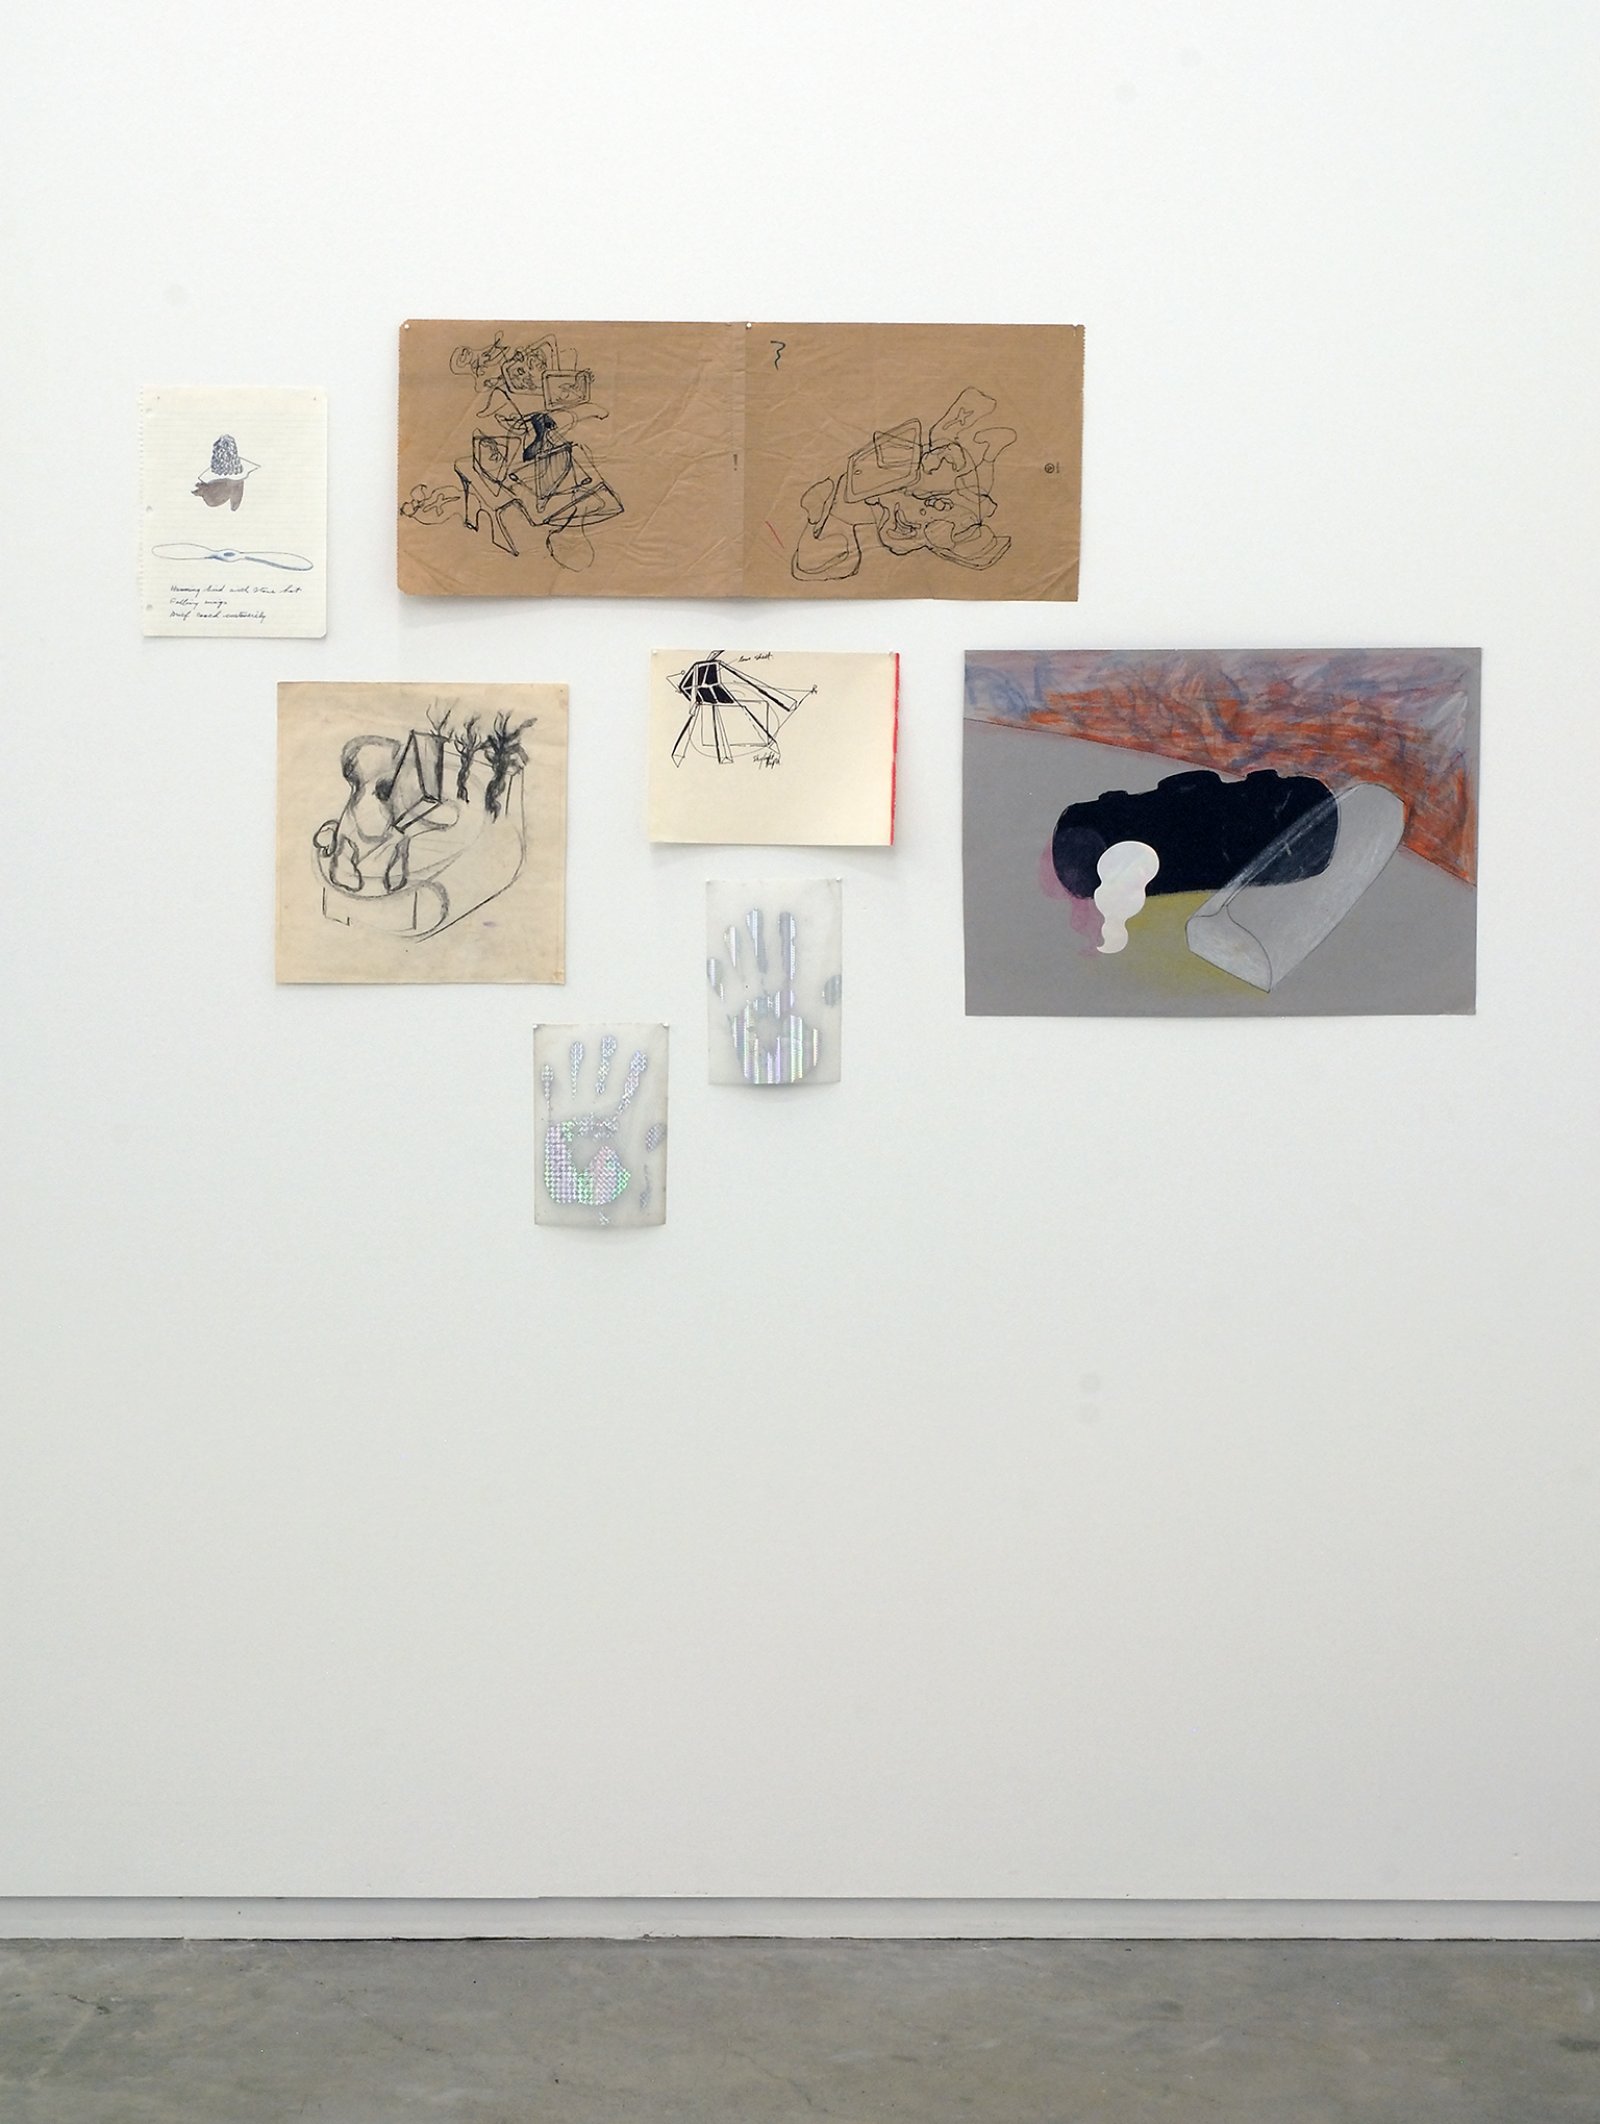 Jerry Pethick, installation view, Catriona Jeffries, 2008  by Jerry Pethick